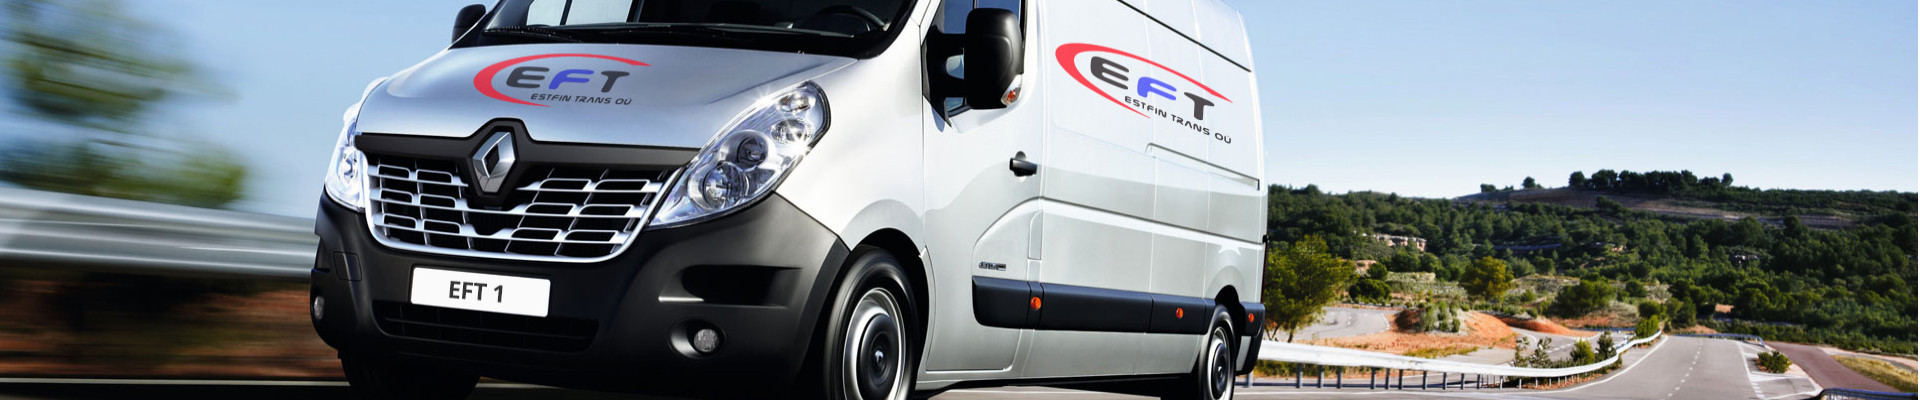 transport and courier services, means of transport, means of handling, carriage of parcel vehicles across estonia, passenger car rental with driver, rear-lift van service across estonia, carriage of parcels across europe